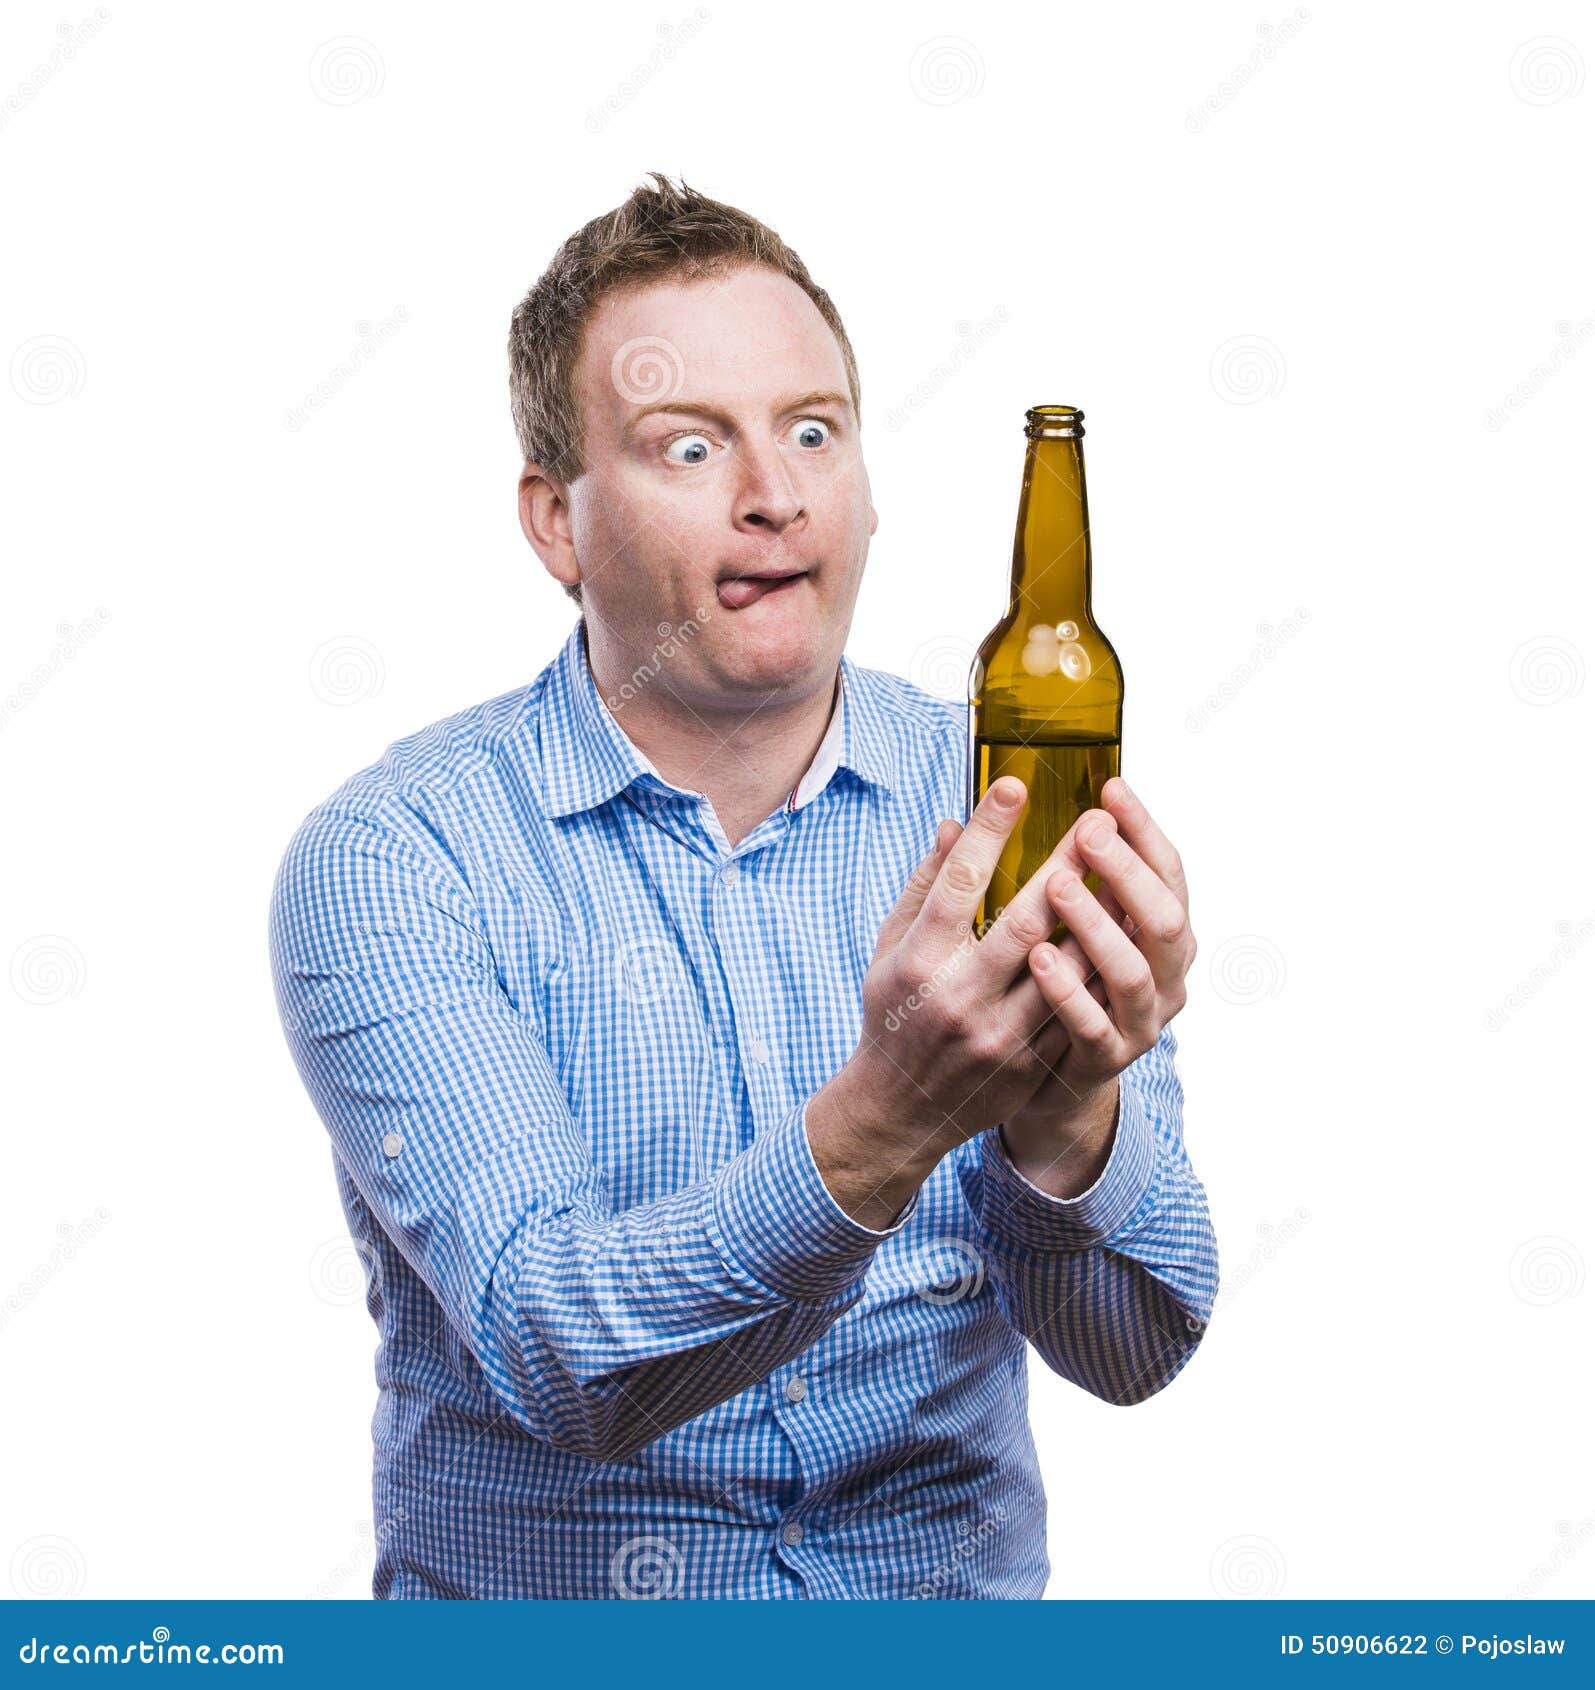 Drunk young man stock photo. Image of drink, businessman - 50906622